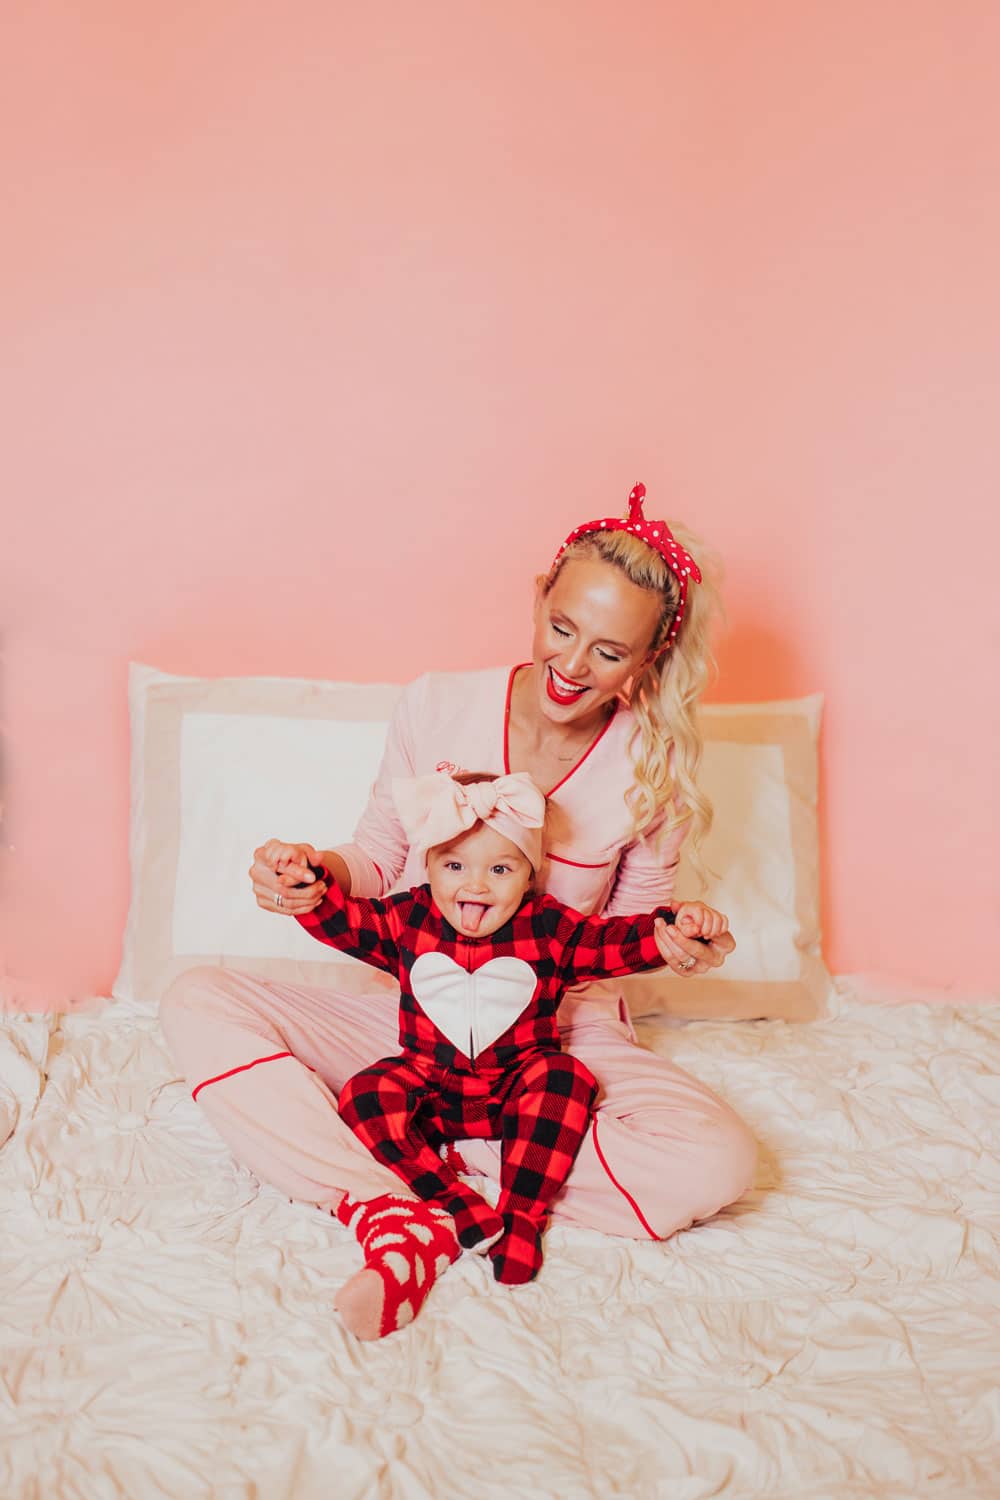 family photo ideas - mommy and me photography tips - at home photoshoot with pink paper backdrop - matching pajamas